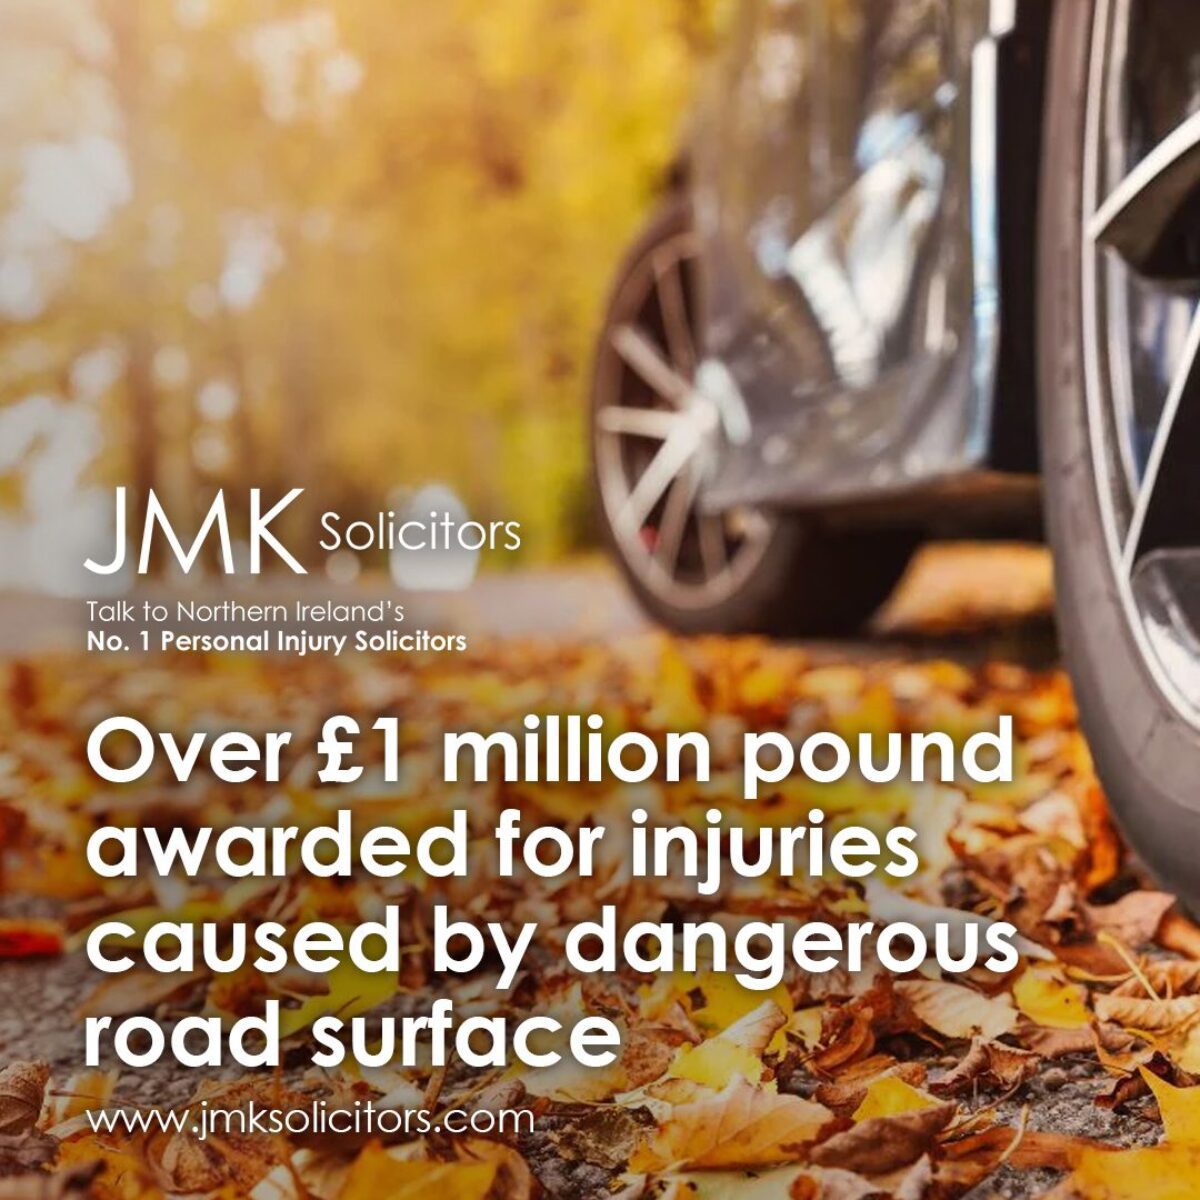 Over £1 million pound awarded for injuries caused by dangerous road surface